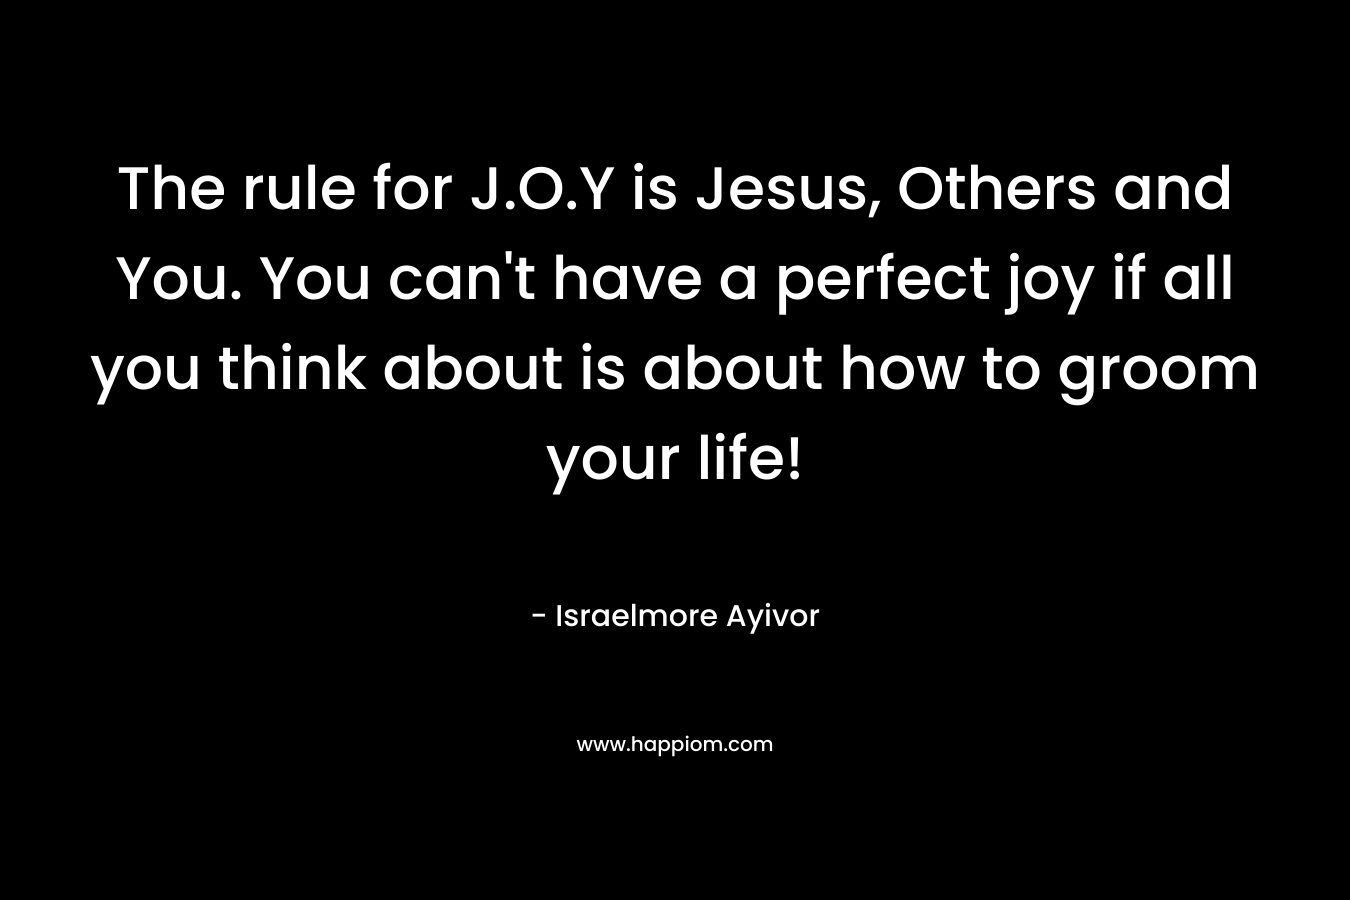 The rule for J.O.Y is Jesus, Others and You. You can’t have a perfect joy if all you think about is about how to groom your life! – Israelmore Ayivor